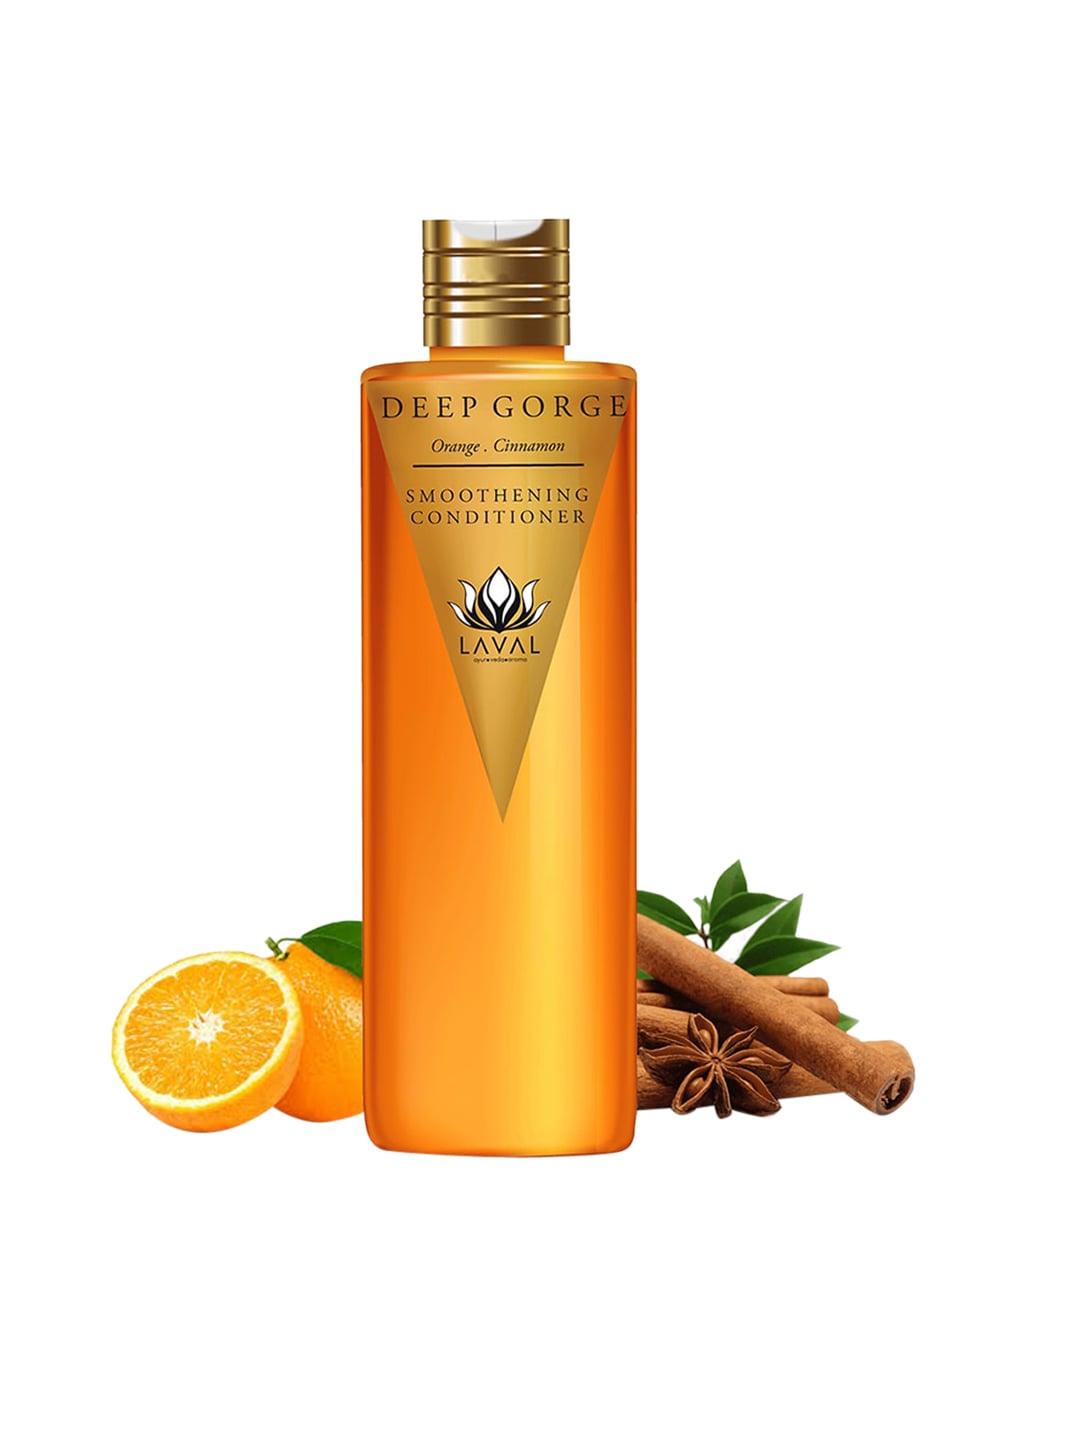 LAVAL Deep George Smoothening Conditioner Price in India